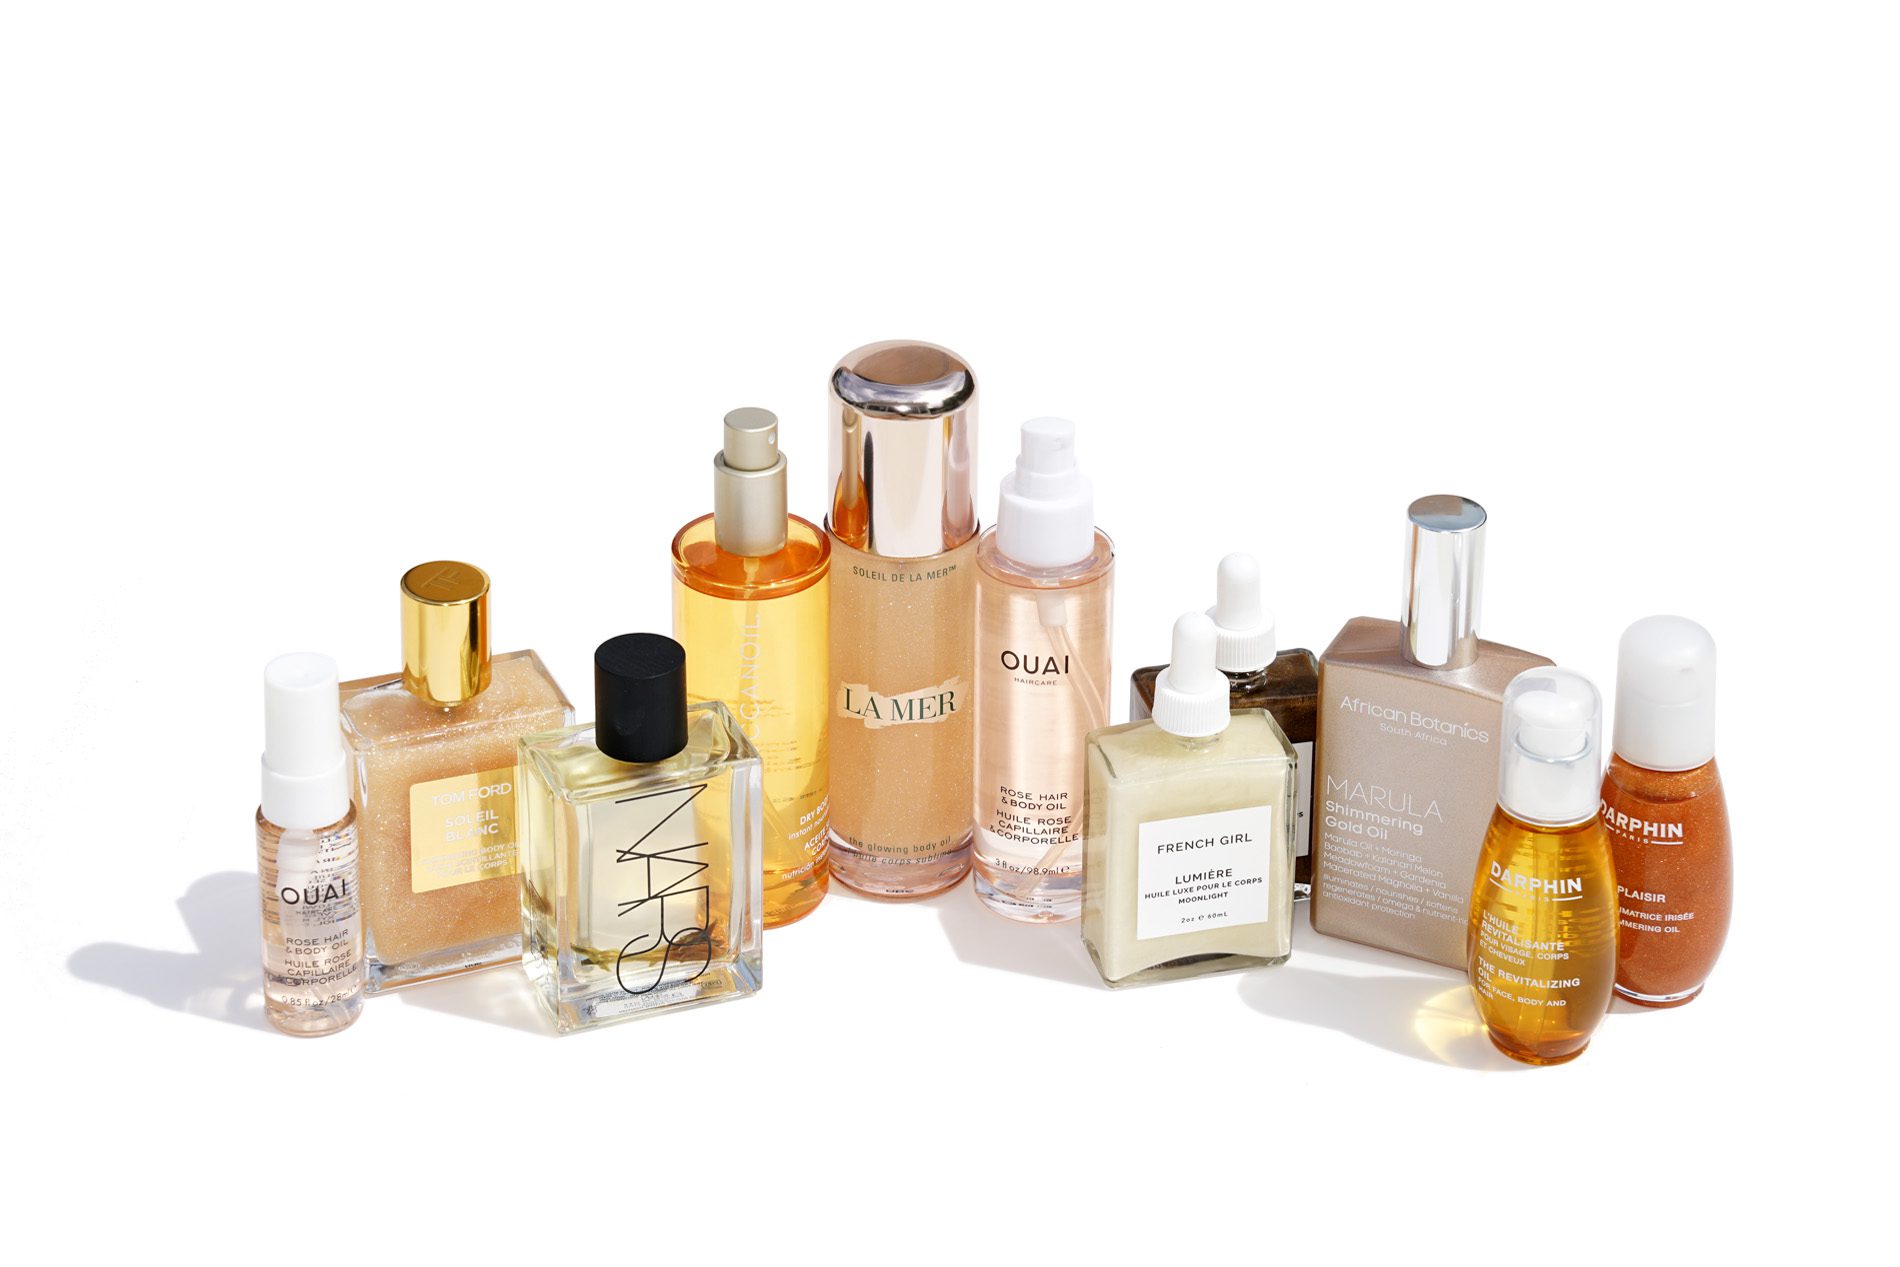 Best Scents of Summer - The Beauty Look Book